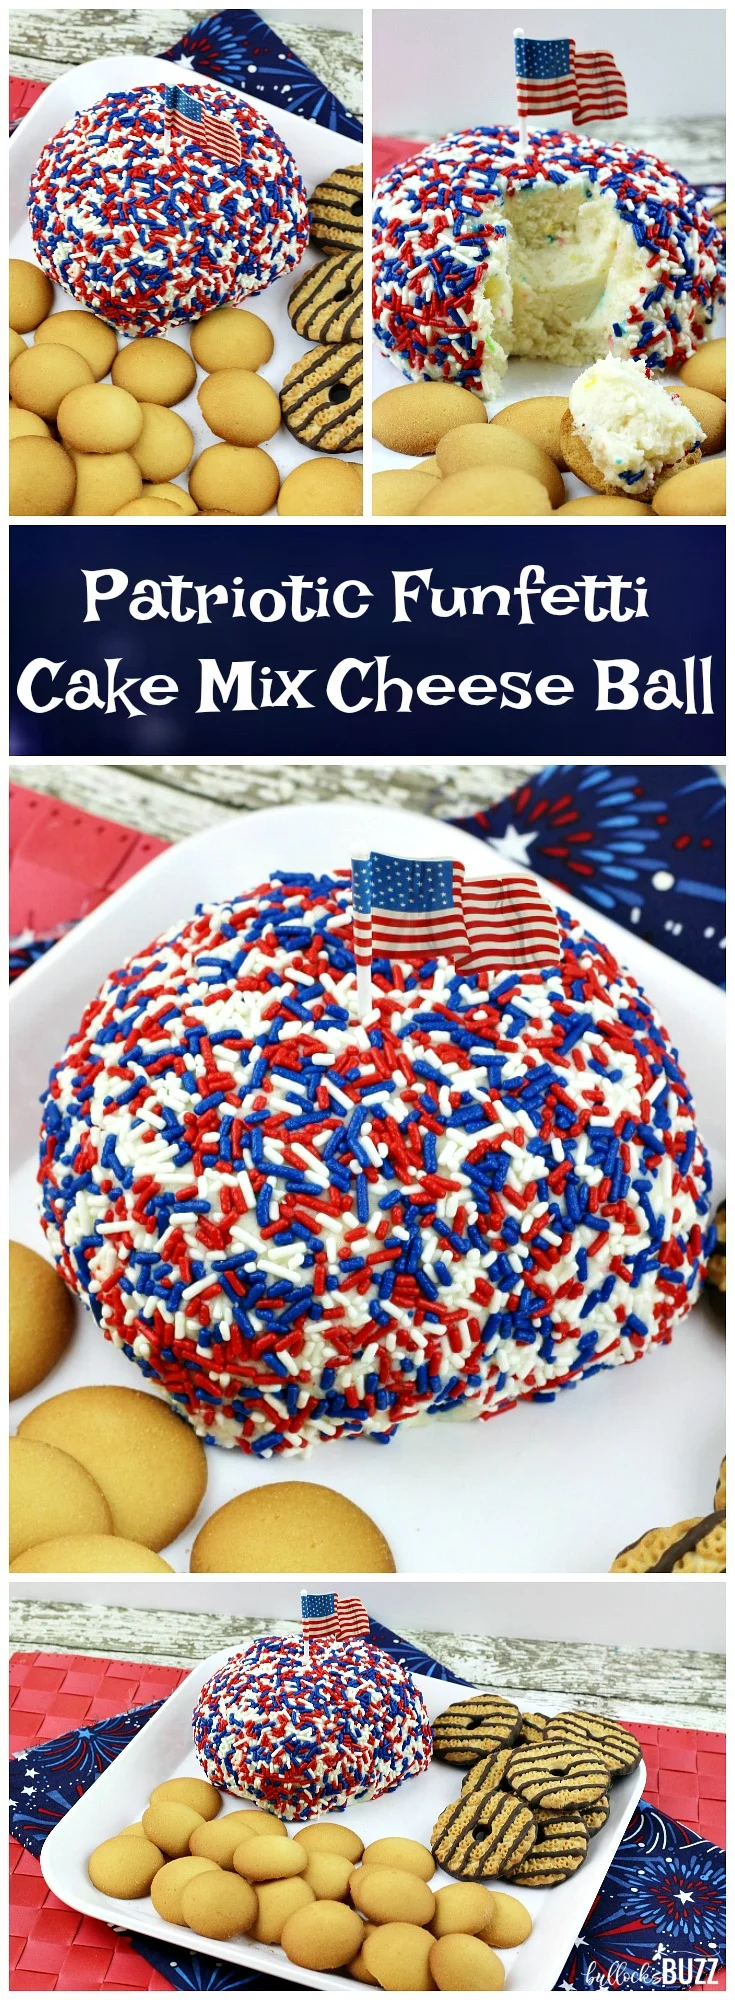 Add some sweetness to your 4th of July holiday celebration with this easy-to-make, no bake patriotic recipe! Colorful Funfetti cake mix is shaped into a ball, dipped in red, white and blue jimmies, then served as a dip in this deliciously sweet Patriotic Funfetti Cake Cheese Ball. #patrioticrecipe #cakemixrecipe #cakemixdip #fourthofjuly